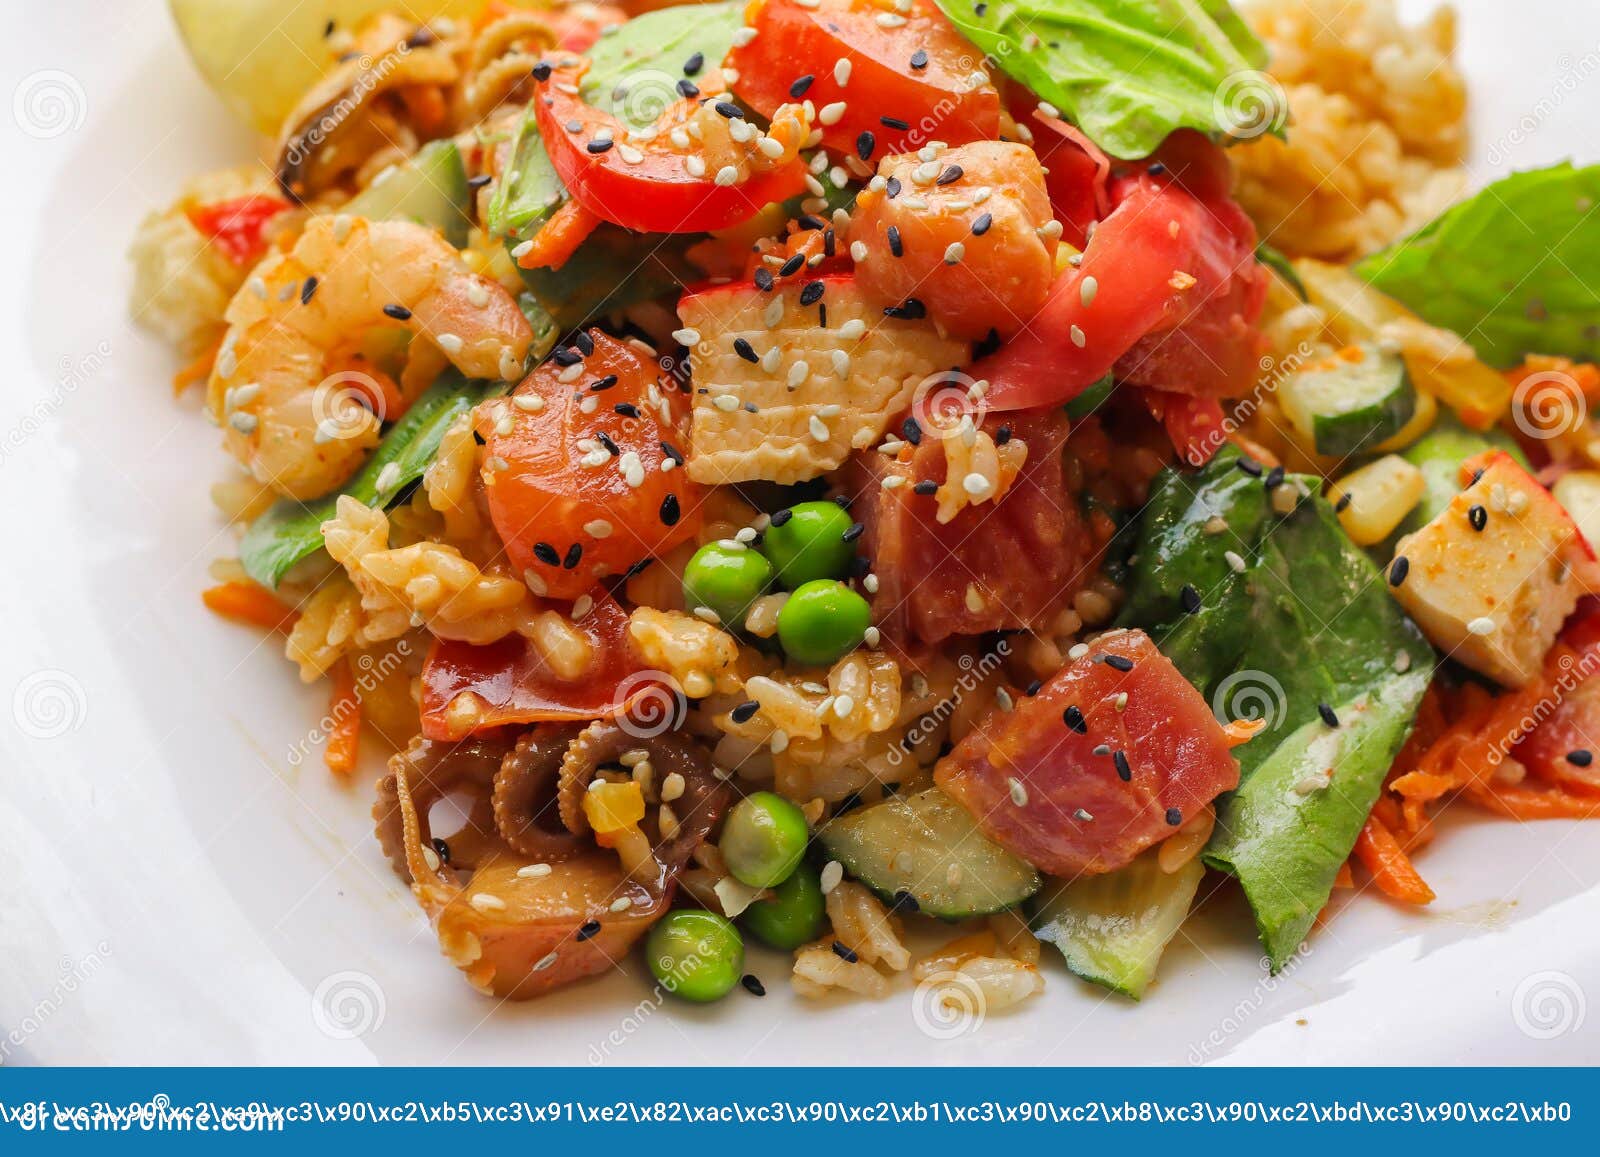 tasty poke bowl with seafood and vegetables